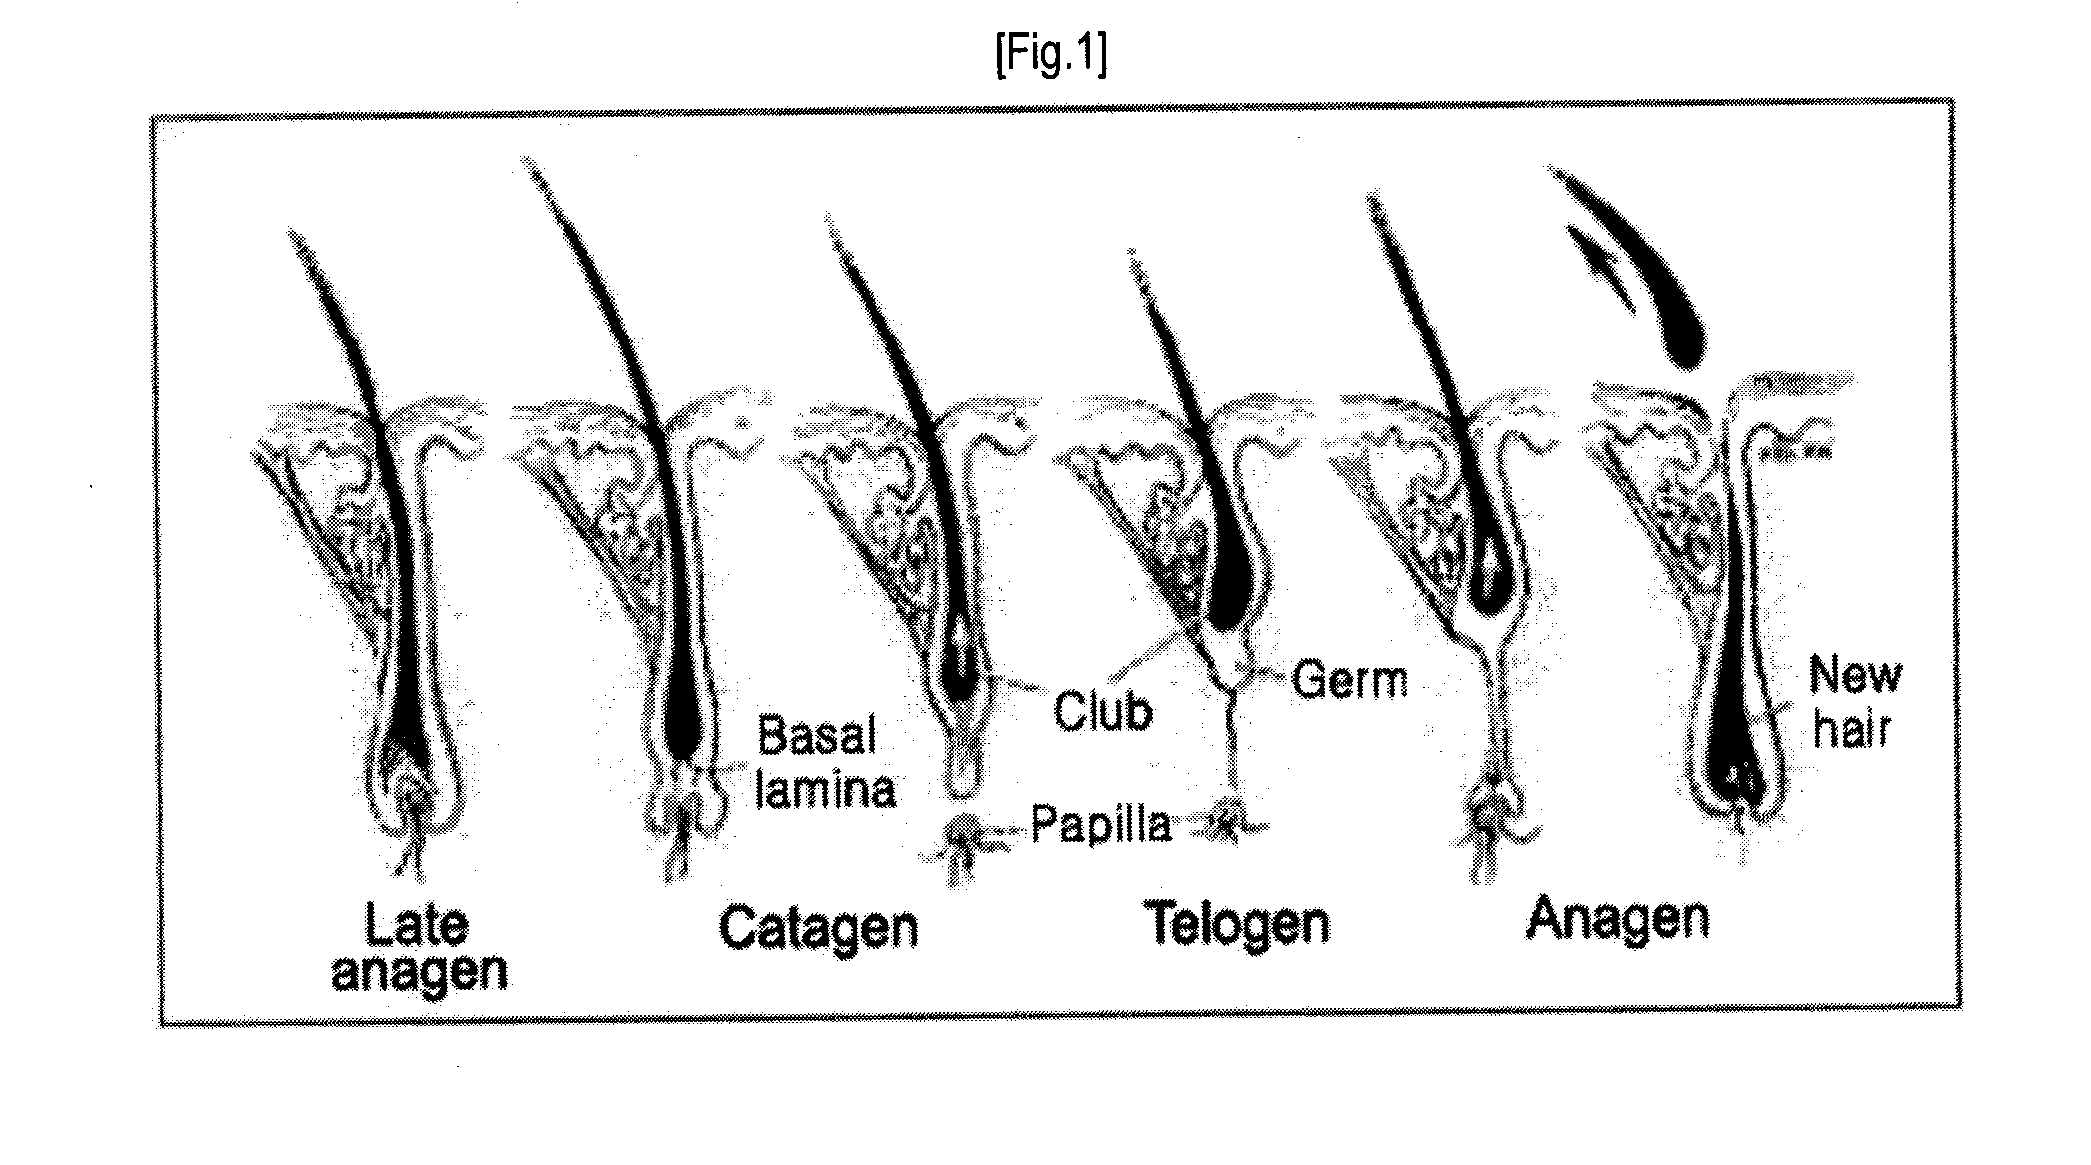 Composition for Treating Baldness with Stem Cell Derived From Umbilical Cord Blood